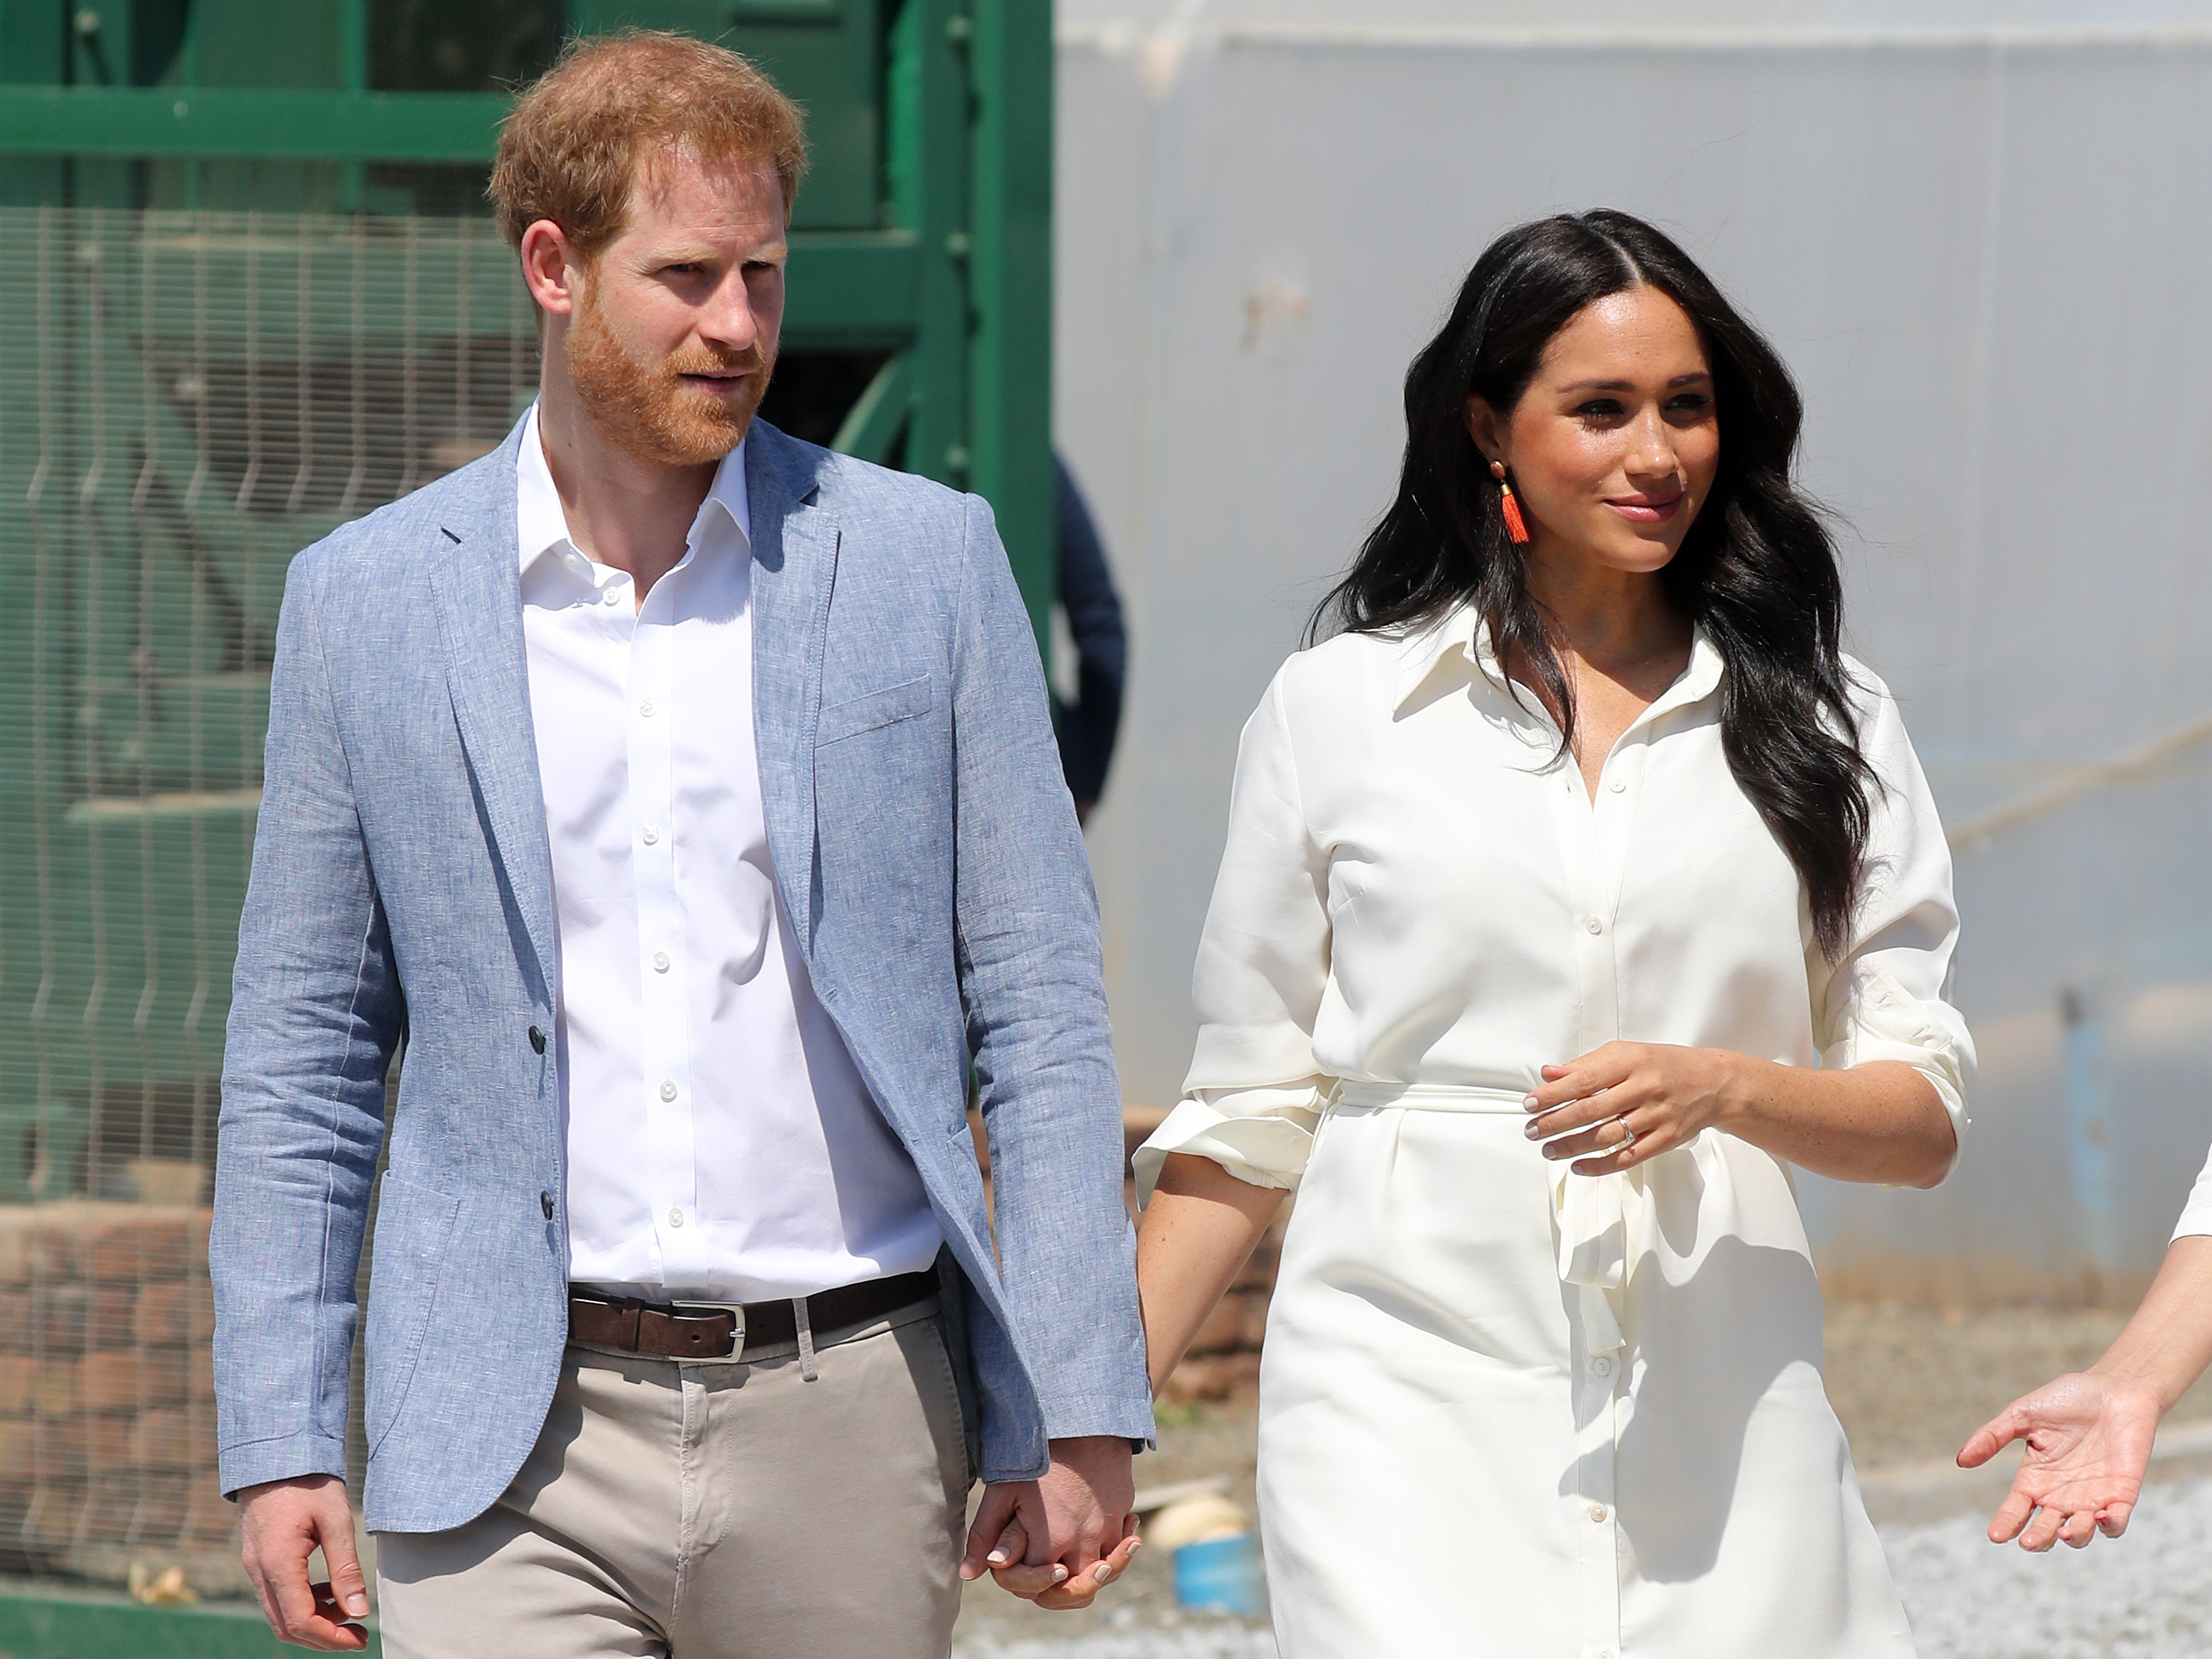 The Duke and Duchess of Sussex in Johannesburg, South Africa (2 October 2019)